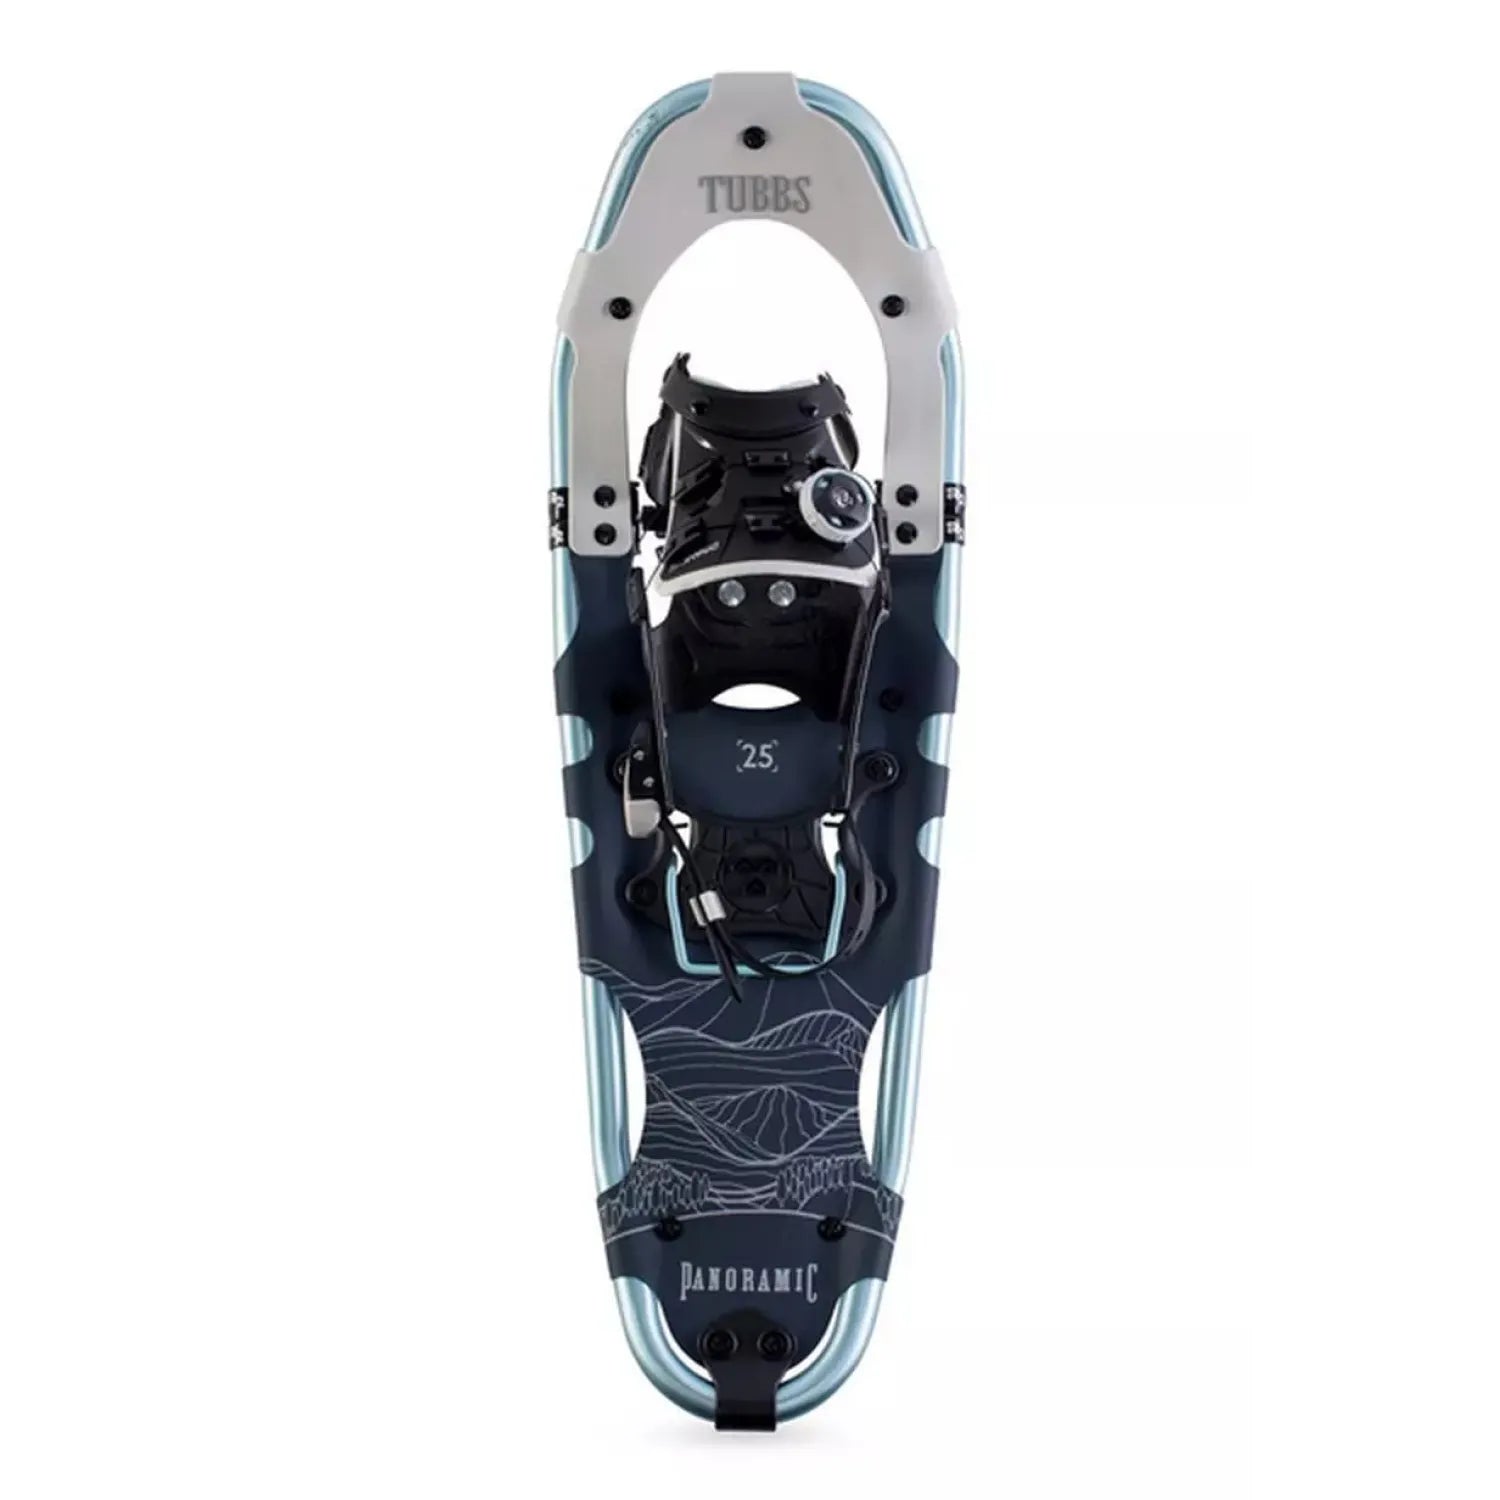 Tubbs Women's Panoramic 30" Snowshoe in Ice Blue and Grey, front view.